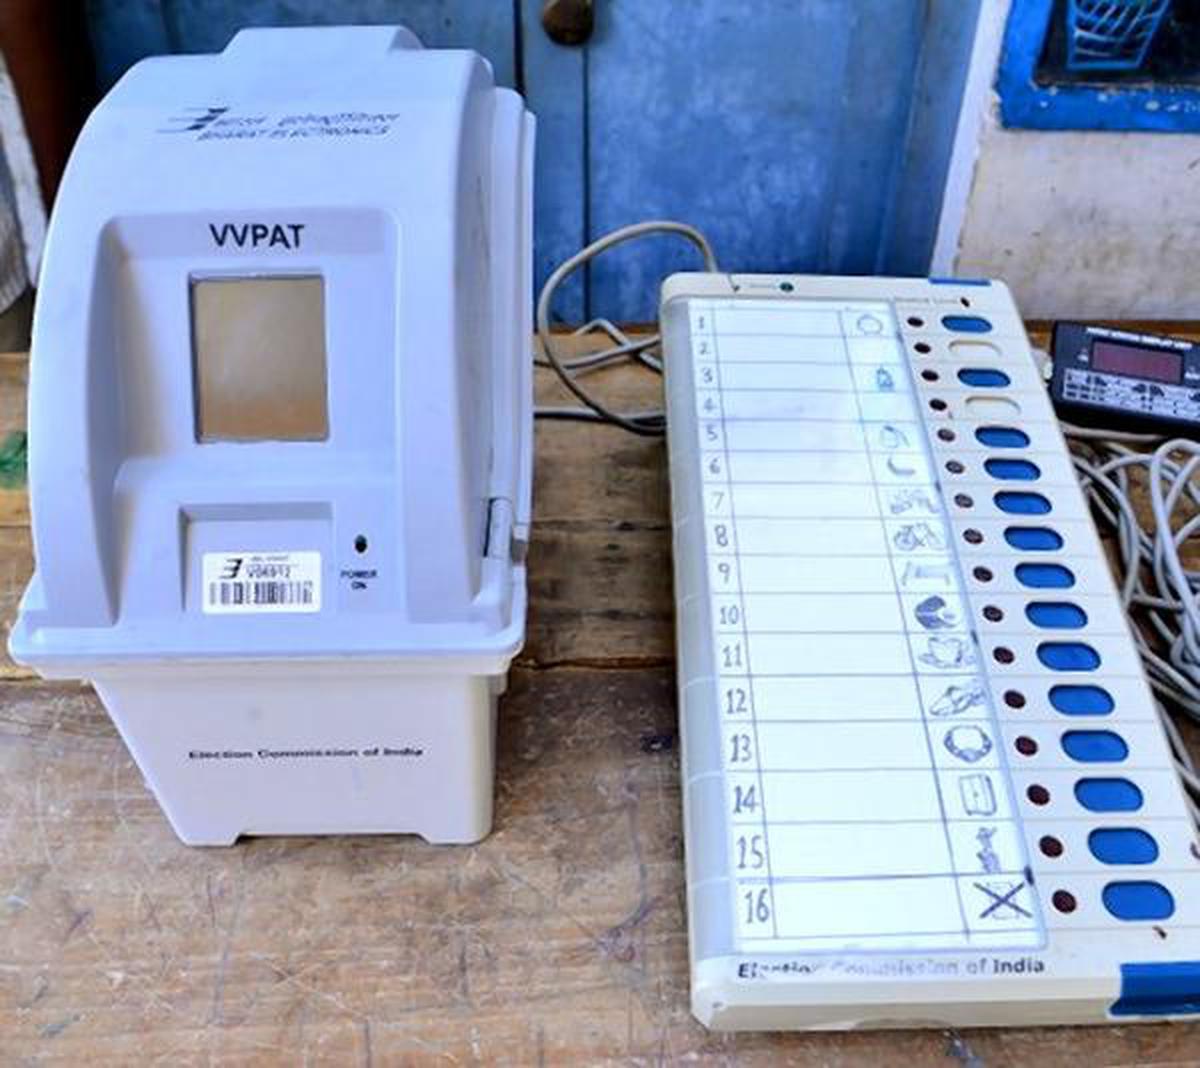 Why is the Centre going for VVPAT machines? | National News - The Hindu